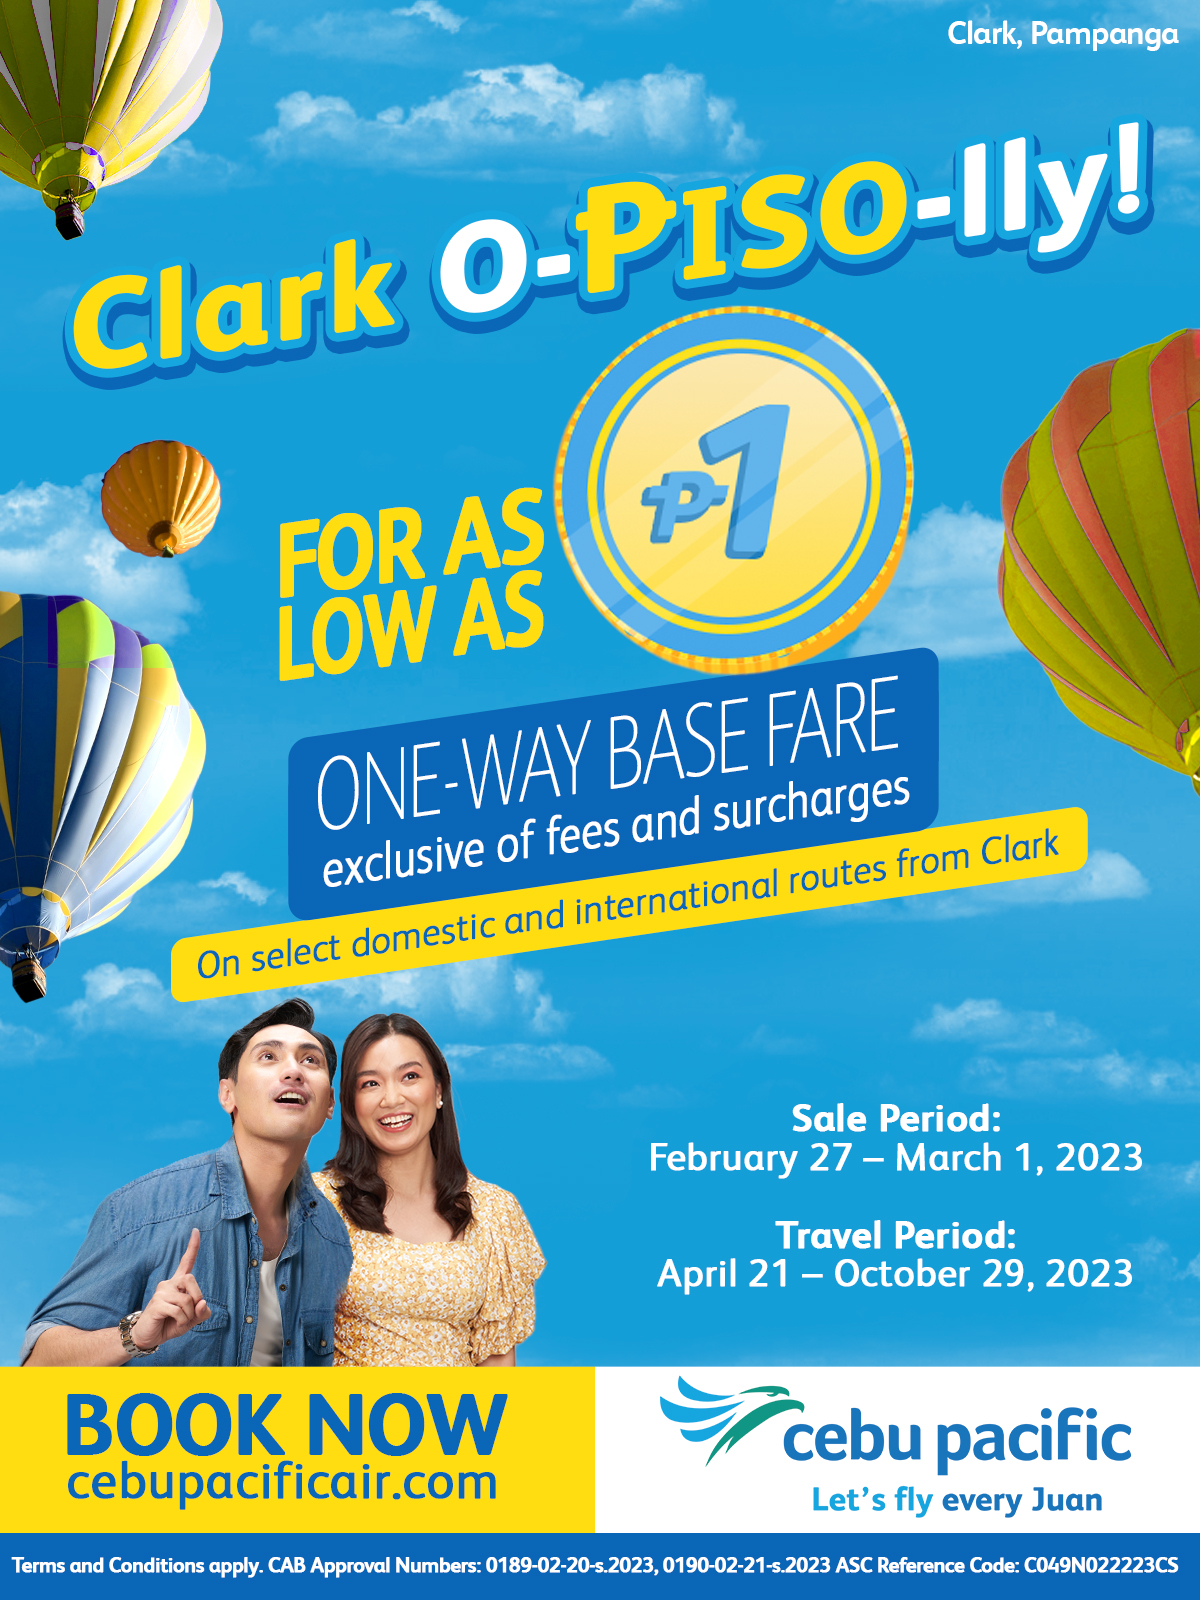 Cebu Pacific Air on X: Clark is officially reopening, kaya all routes to  Clark are o-PISO-lly for as low as P1 one-way base fare! (exclusive of fees  and surcharges). Let's Fly everyJuan 